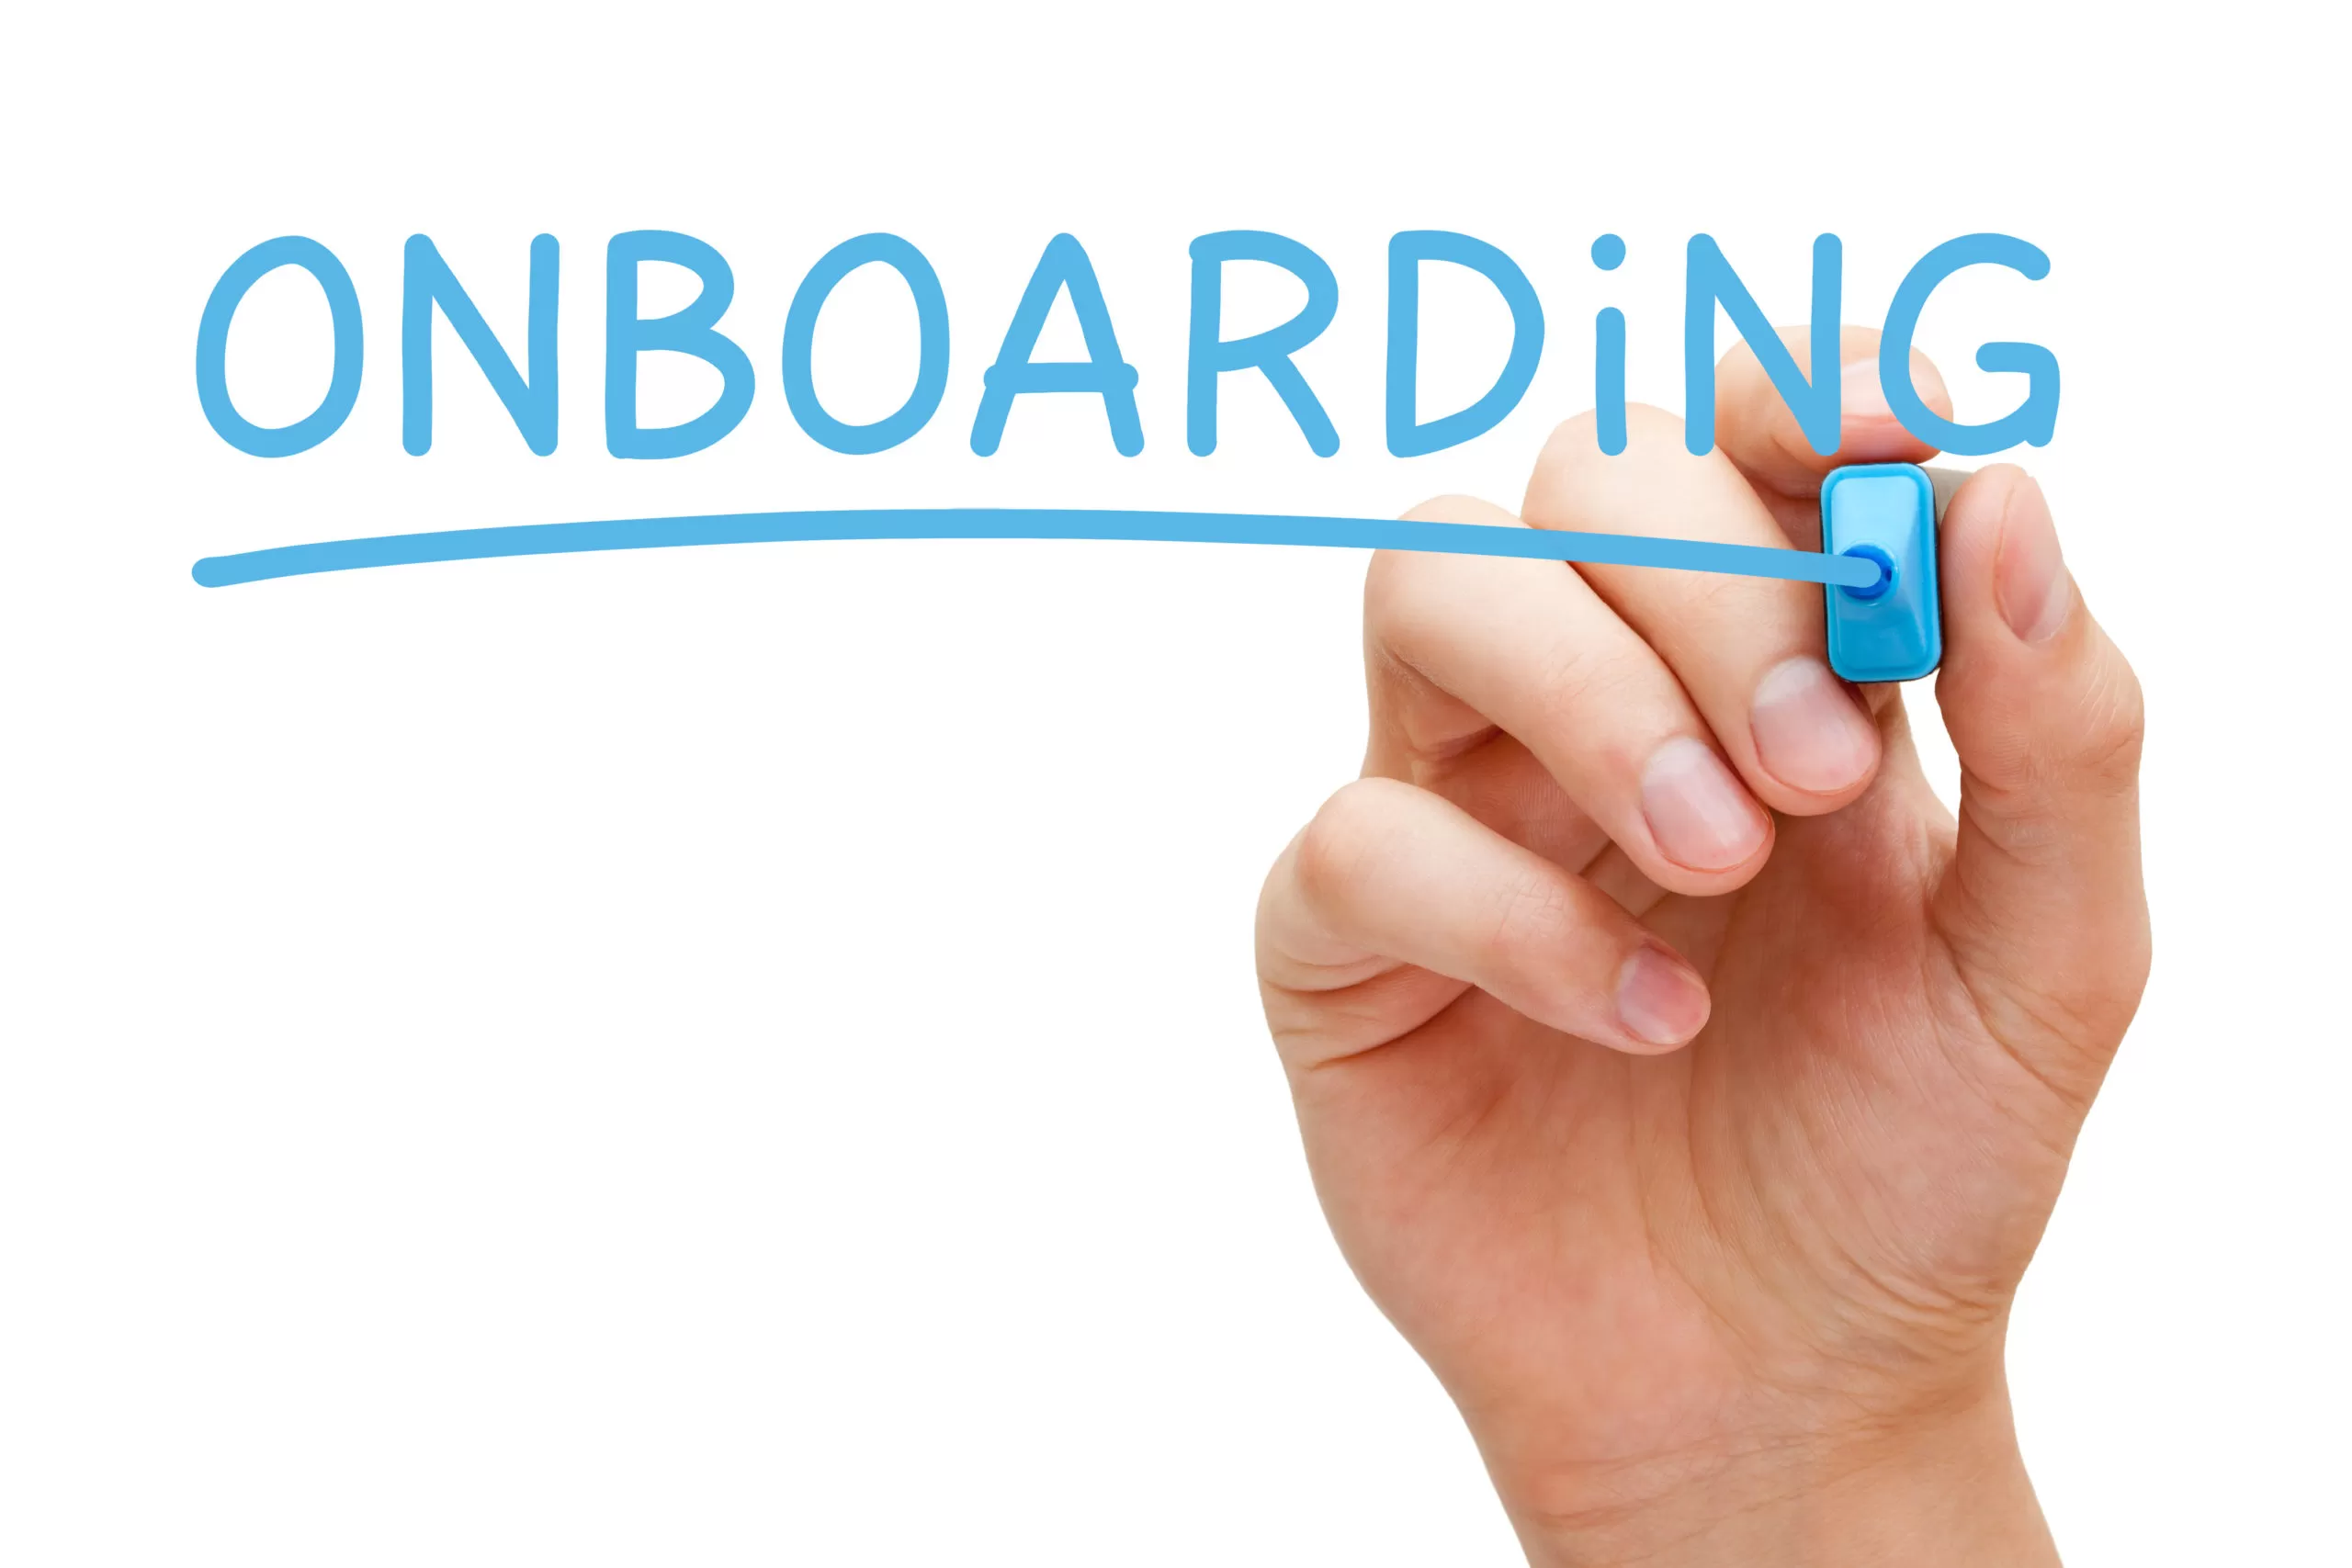 What is Onboarding?